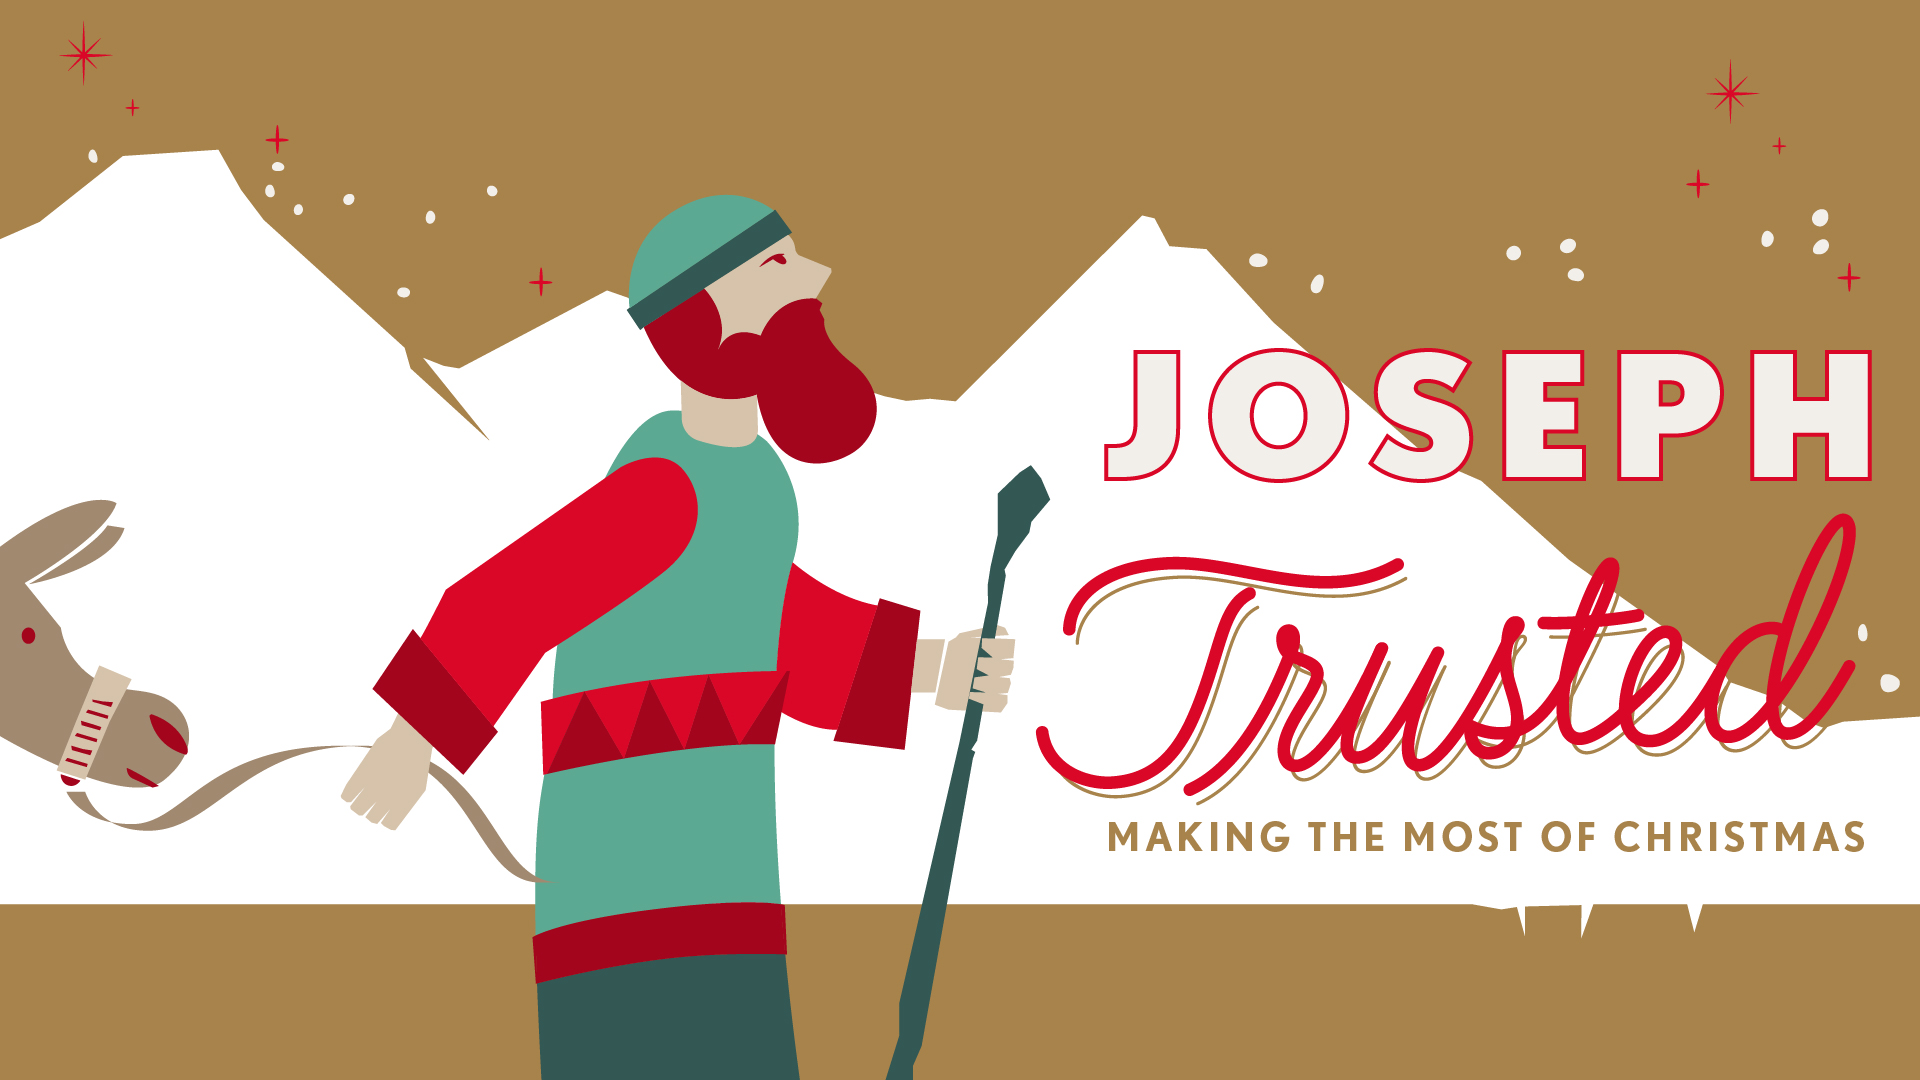 11:00 – Making the Most of Christmas – Joseph : Trusted